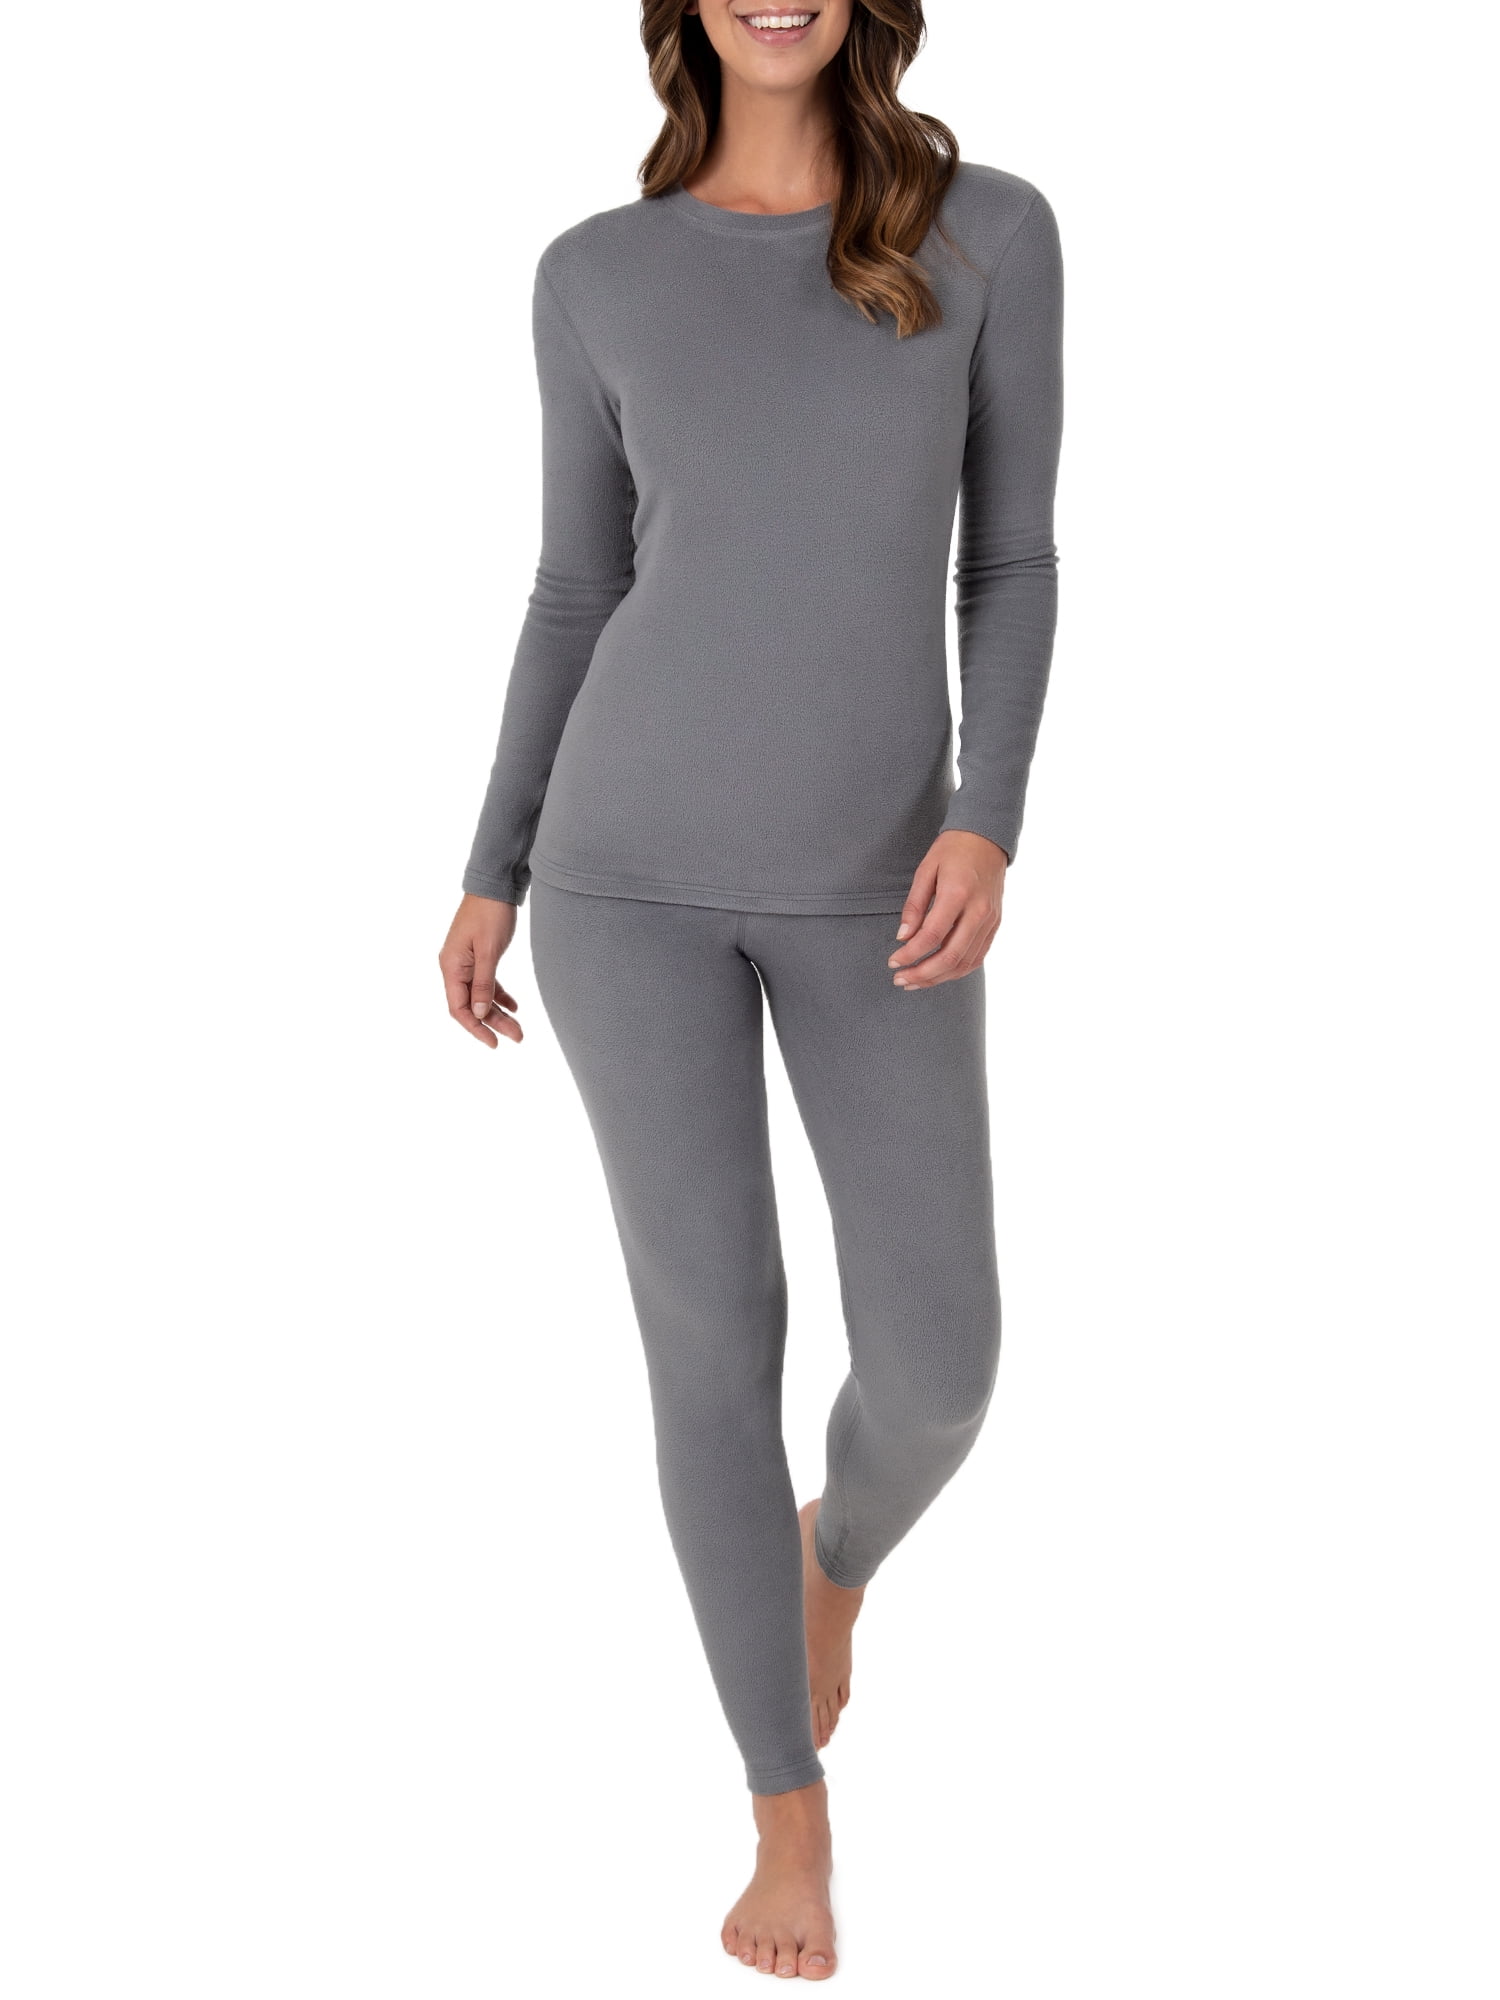 Fruit of the Loom Women's & Women's Plus Stretch Fleece Thermal Top and ...